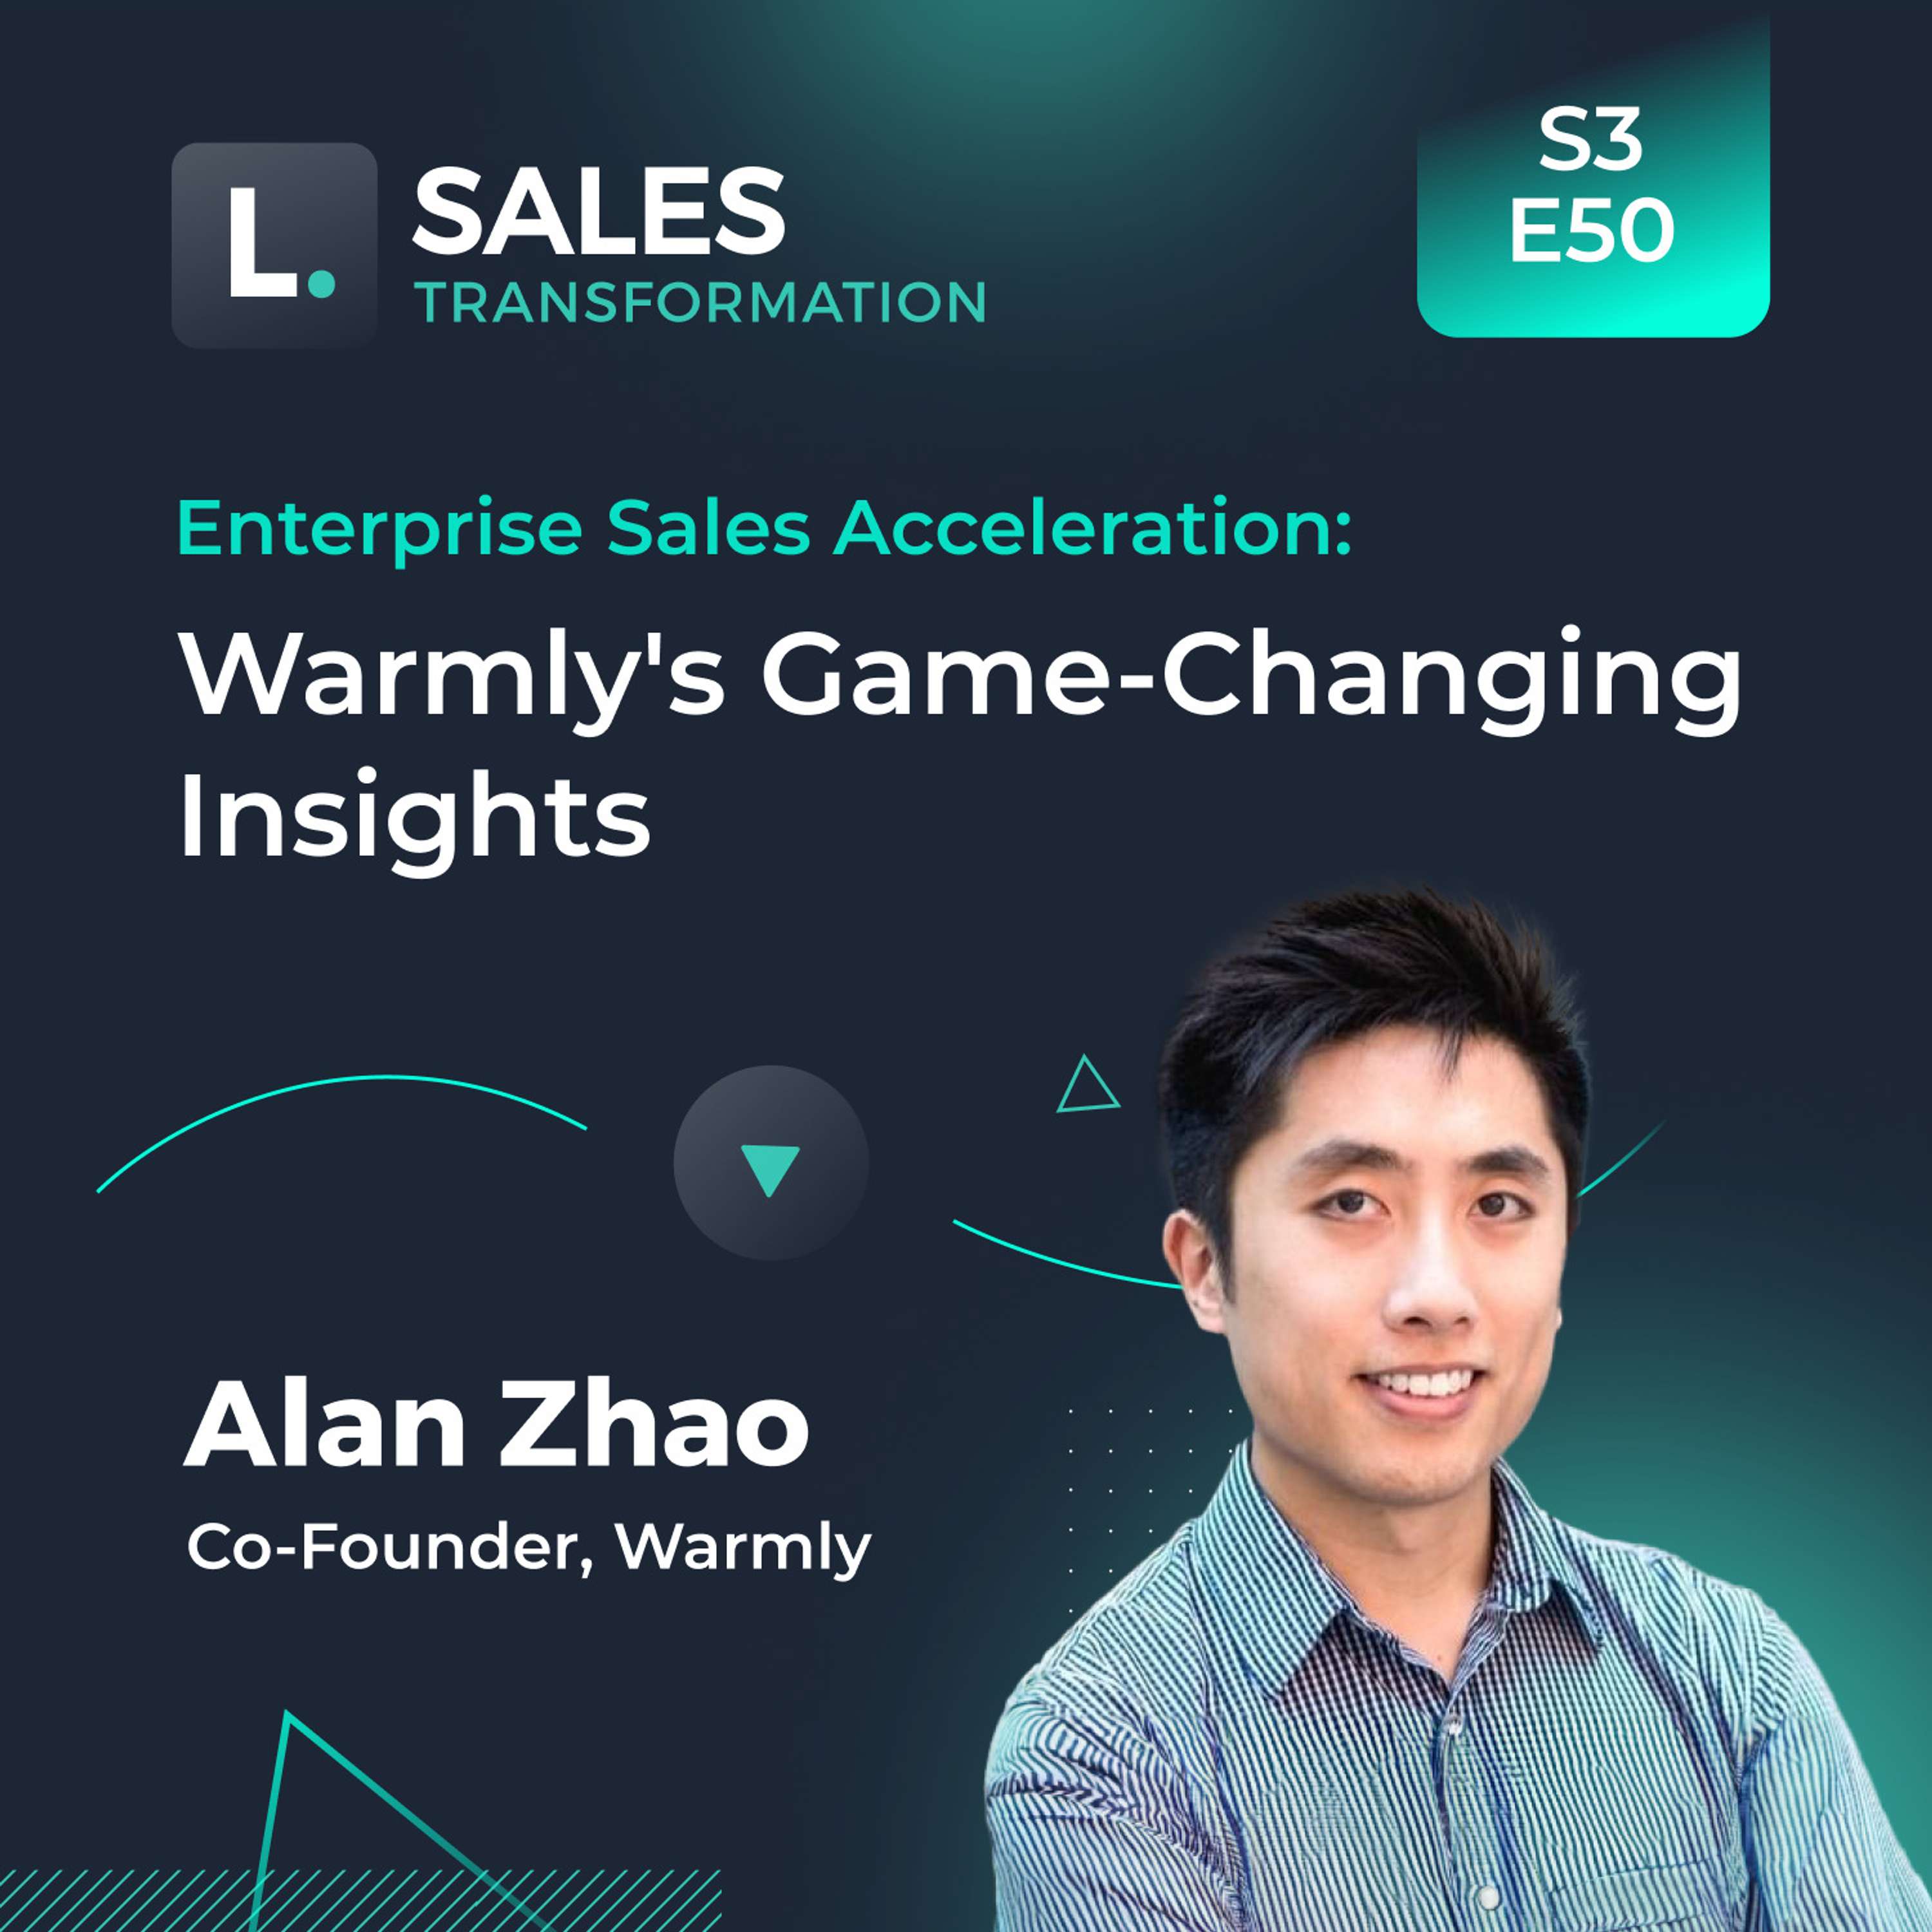 724 - Enterprise Sales Acceleration: Warmly’s Game-Changing Insights, with Alan Zhao